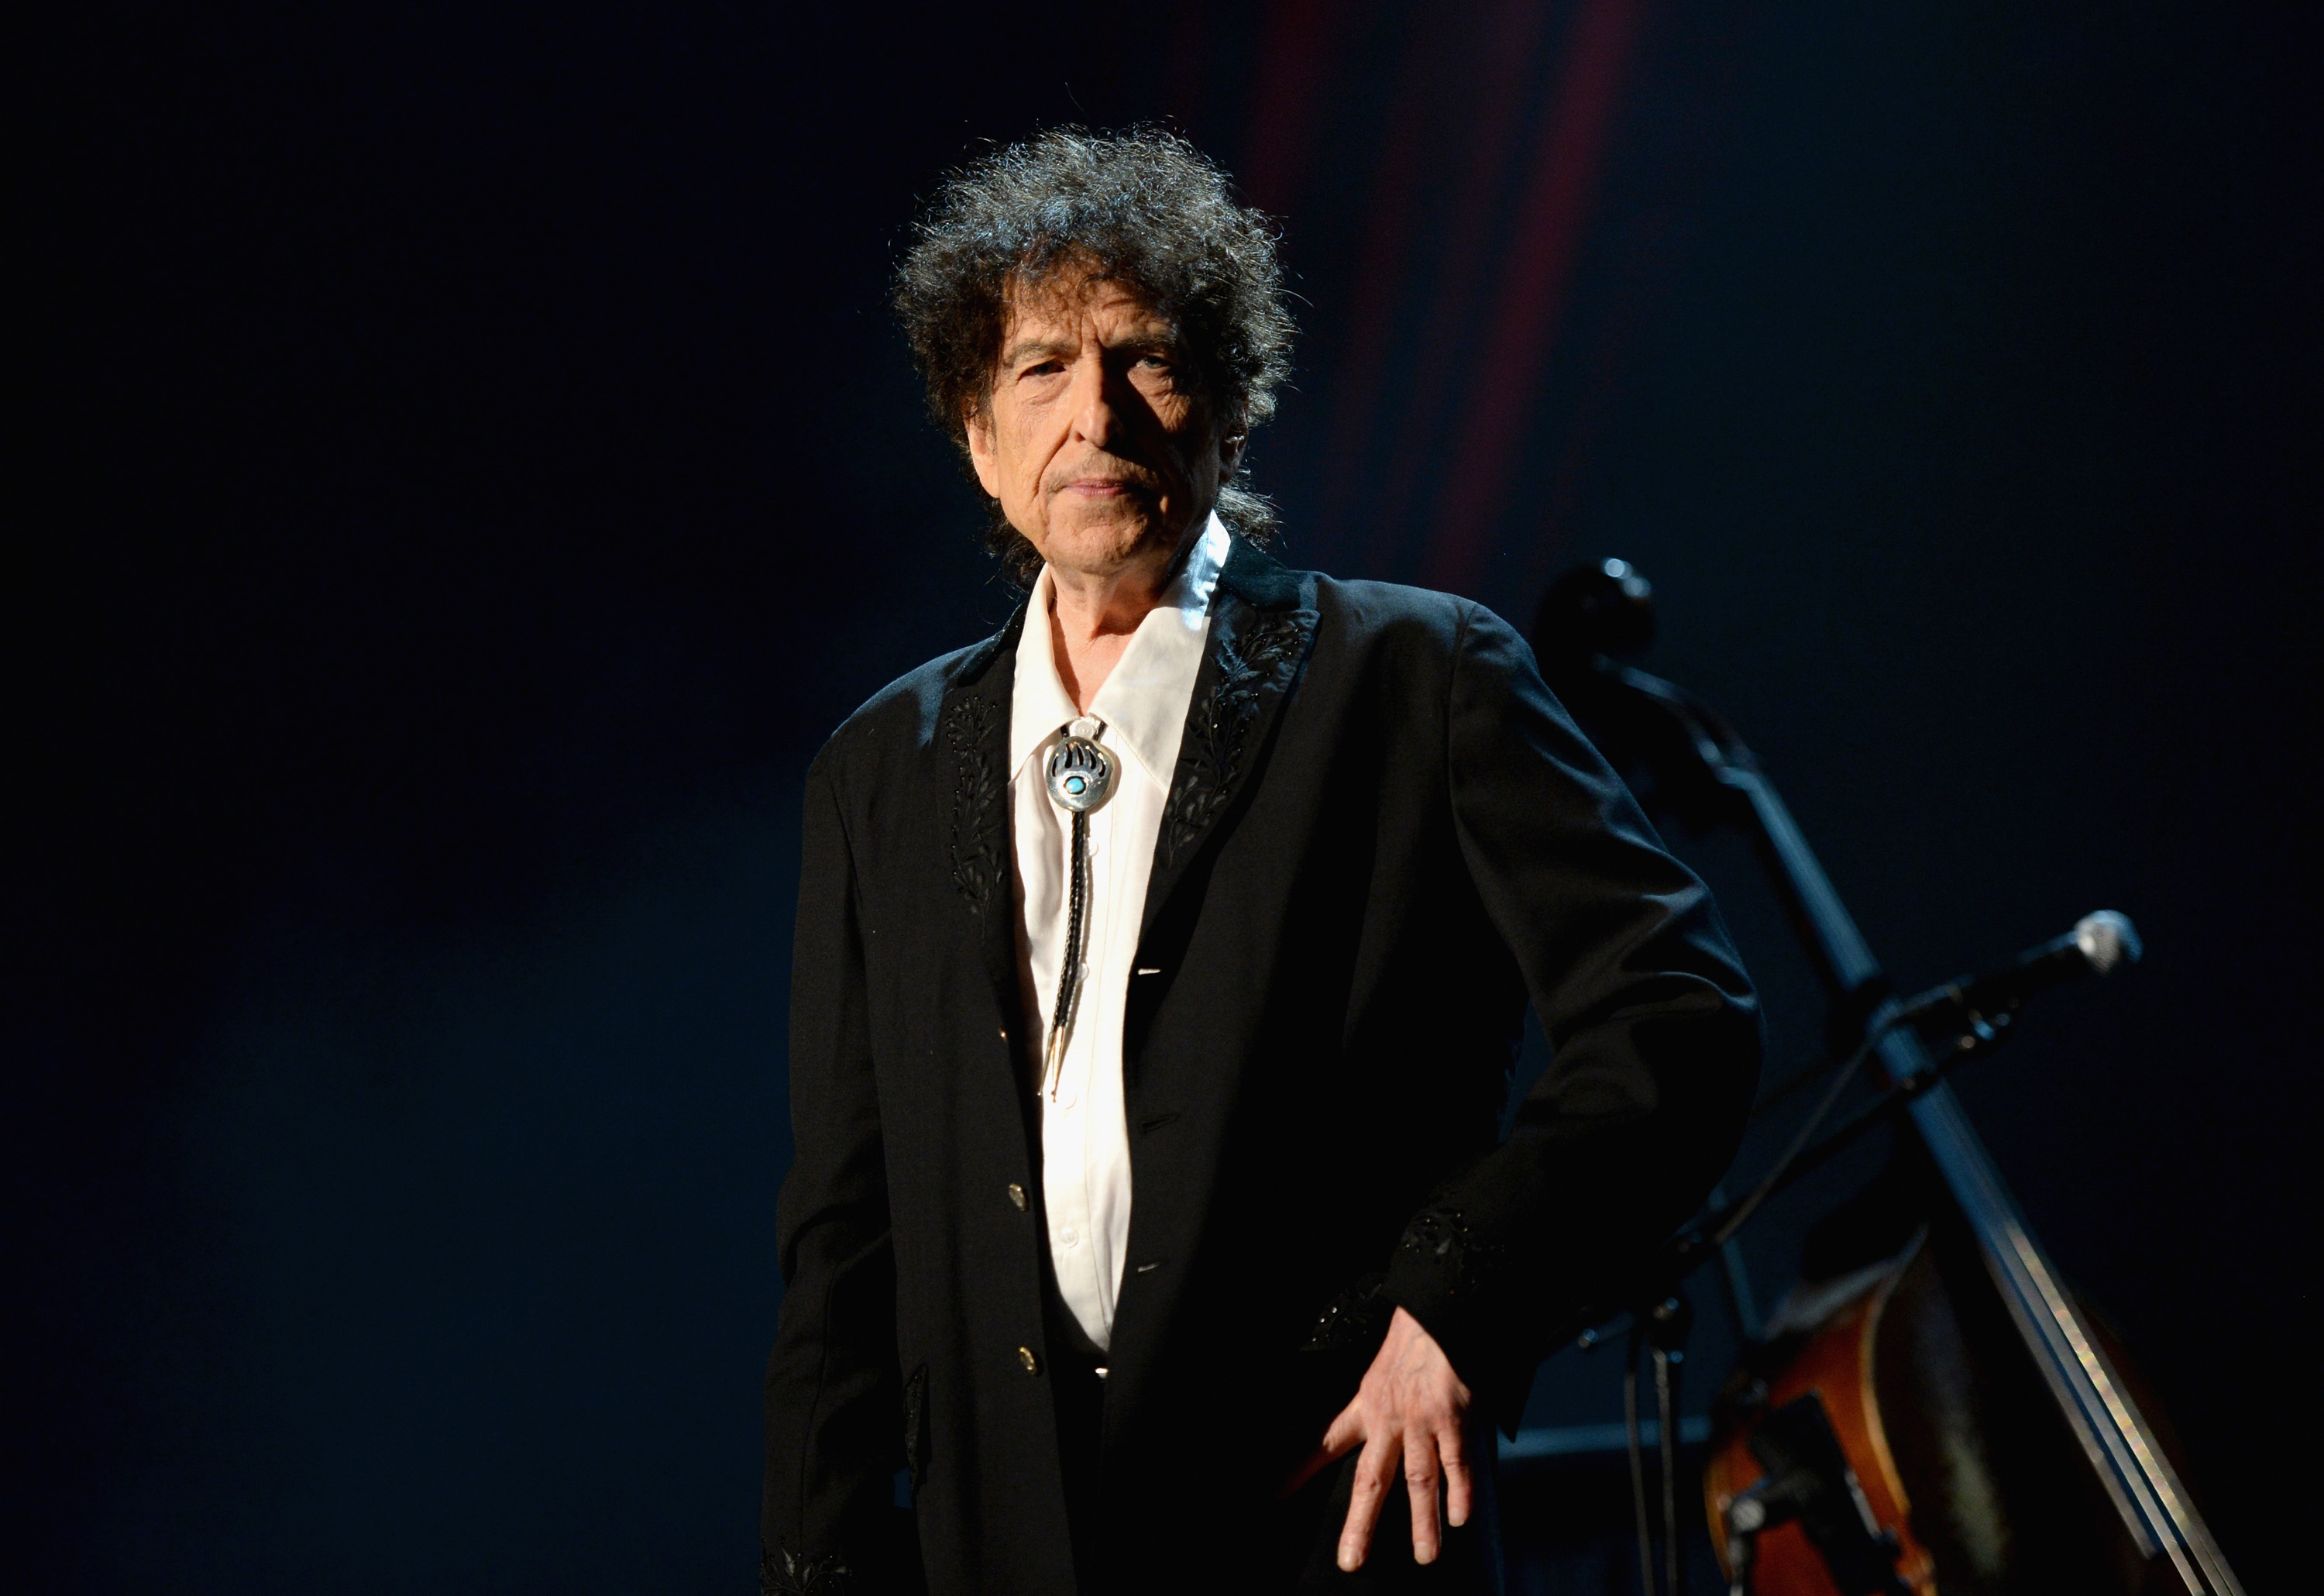 Bob Dylan wears a bolo tie and stands with his hand on his hip.